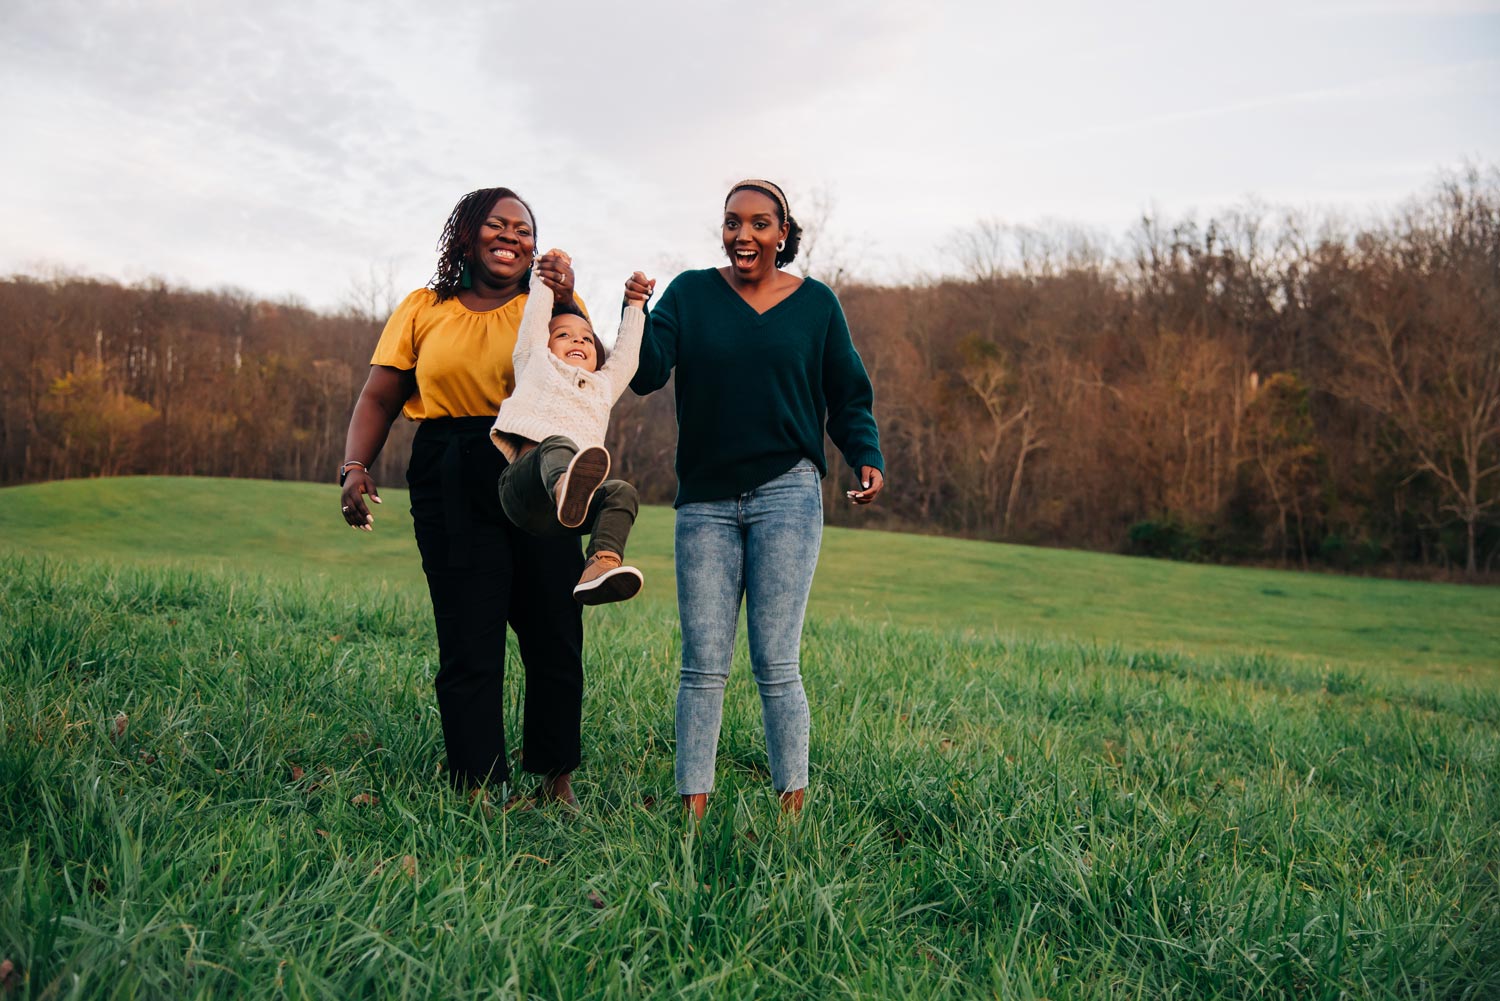 Carla Hallman, left,  and her sister, right, swing Hallman's son, center, while walking through a grassy field surrounded by trees